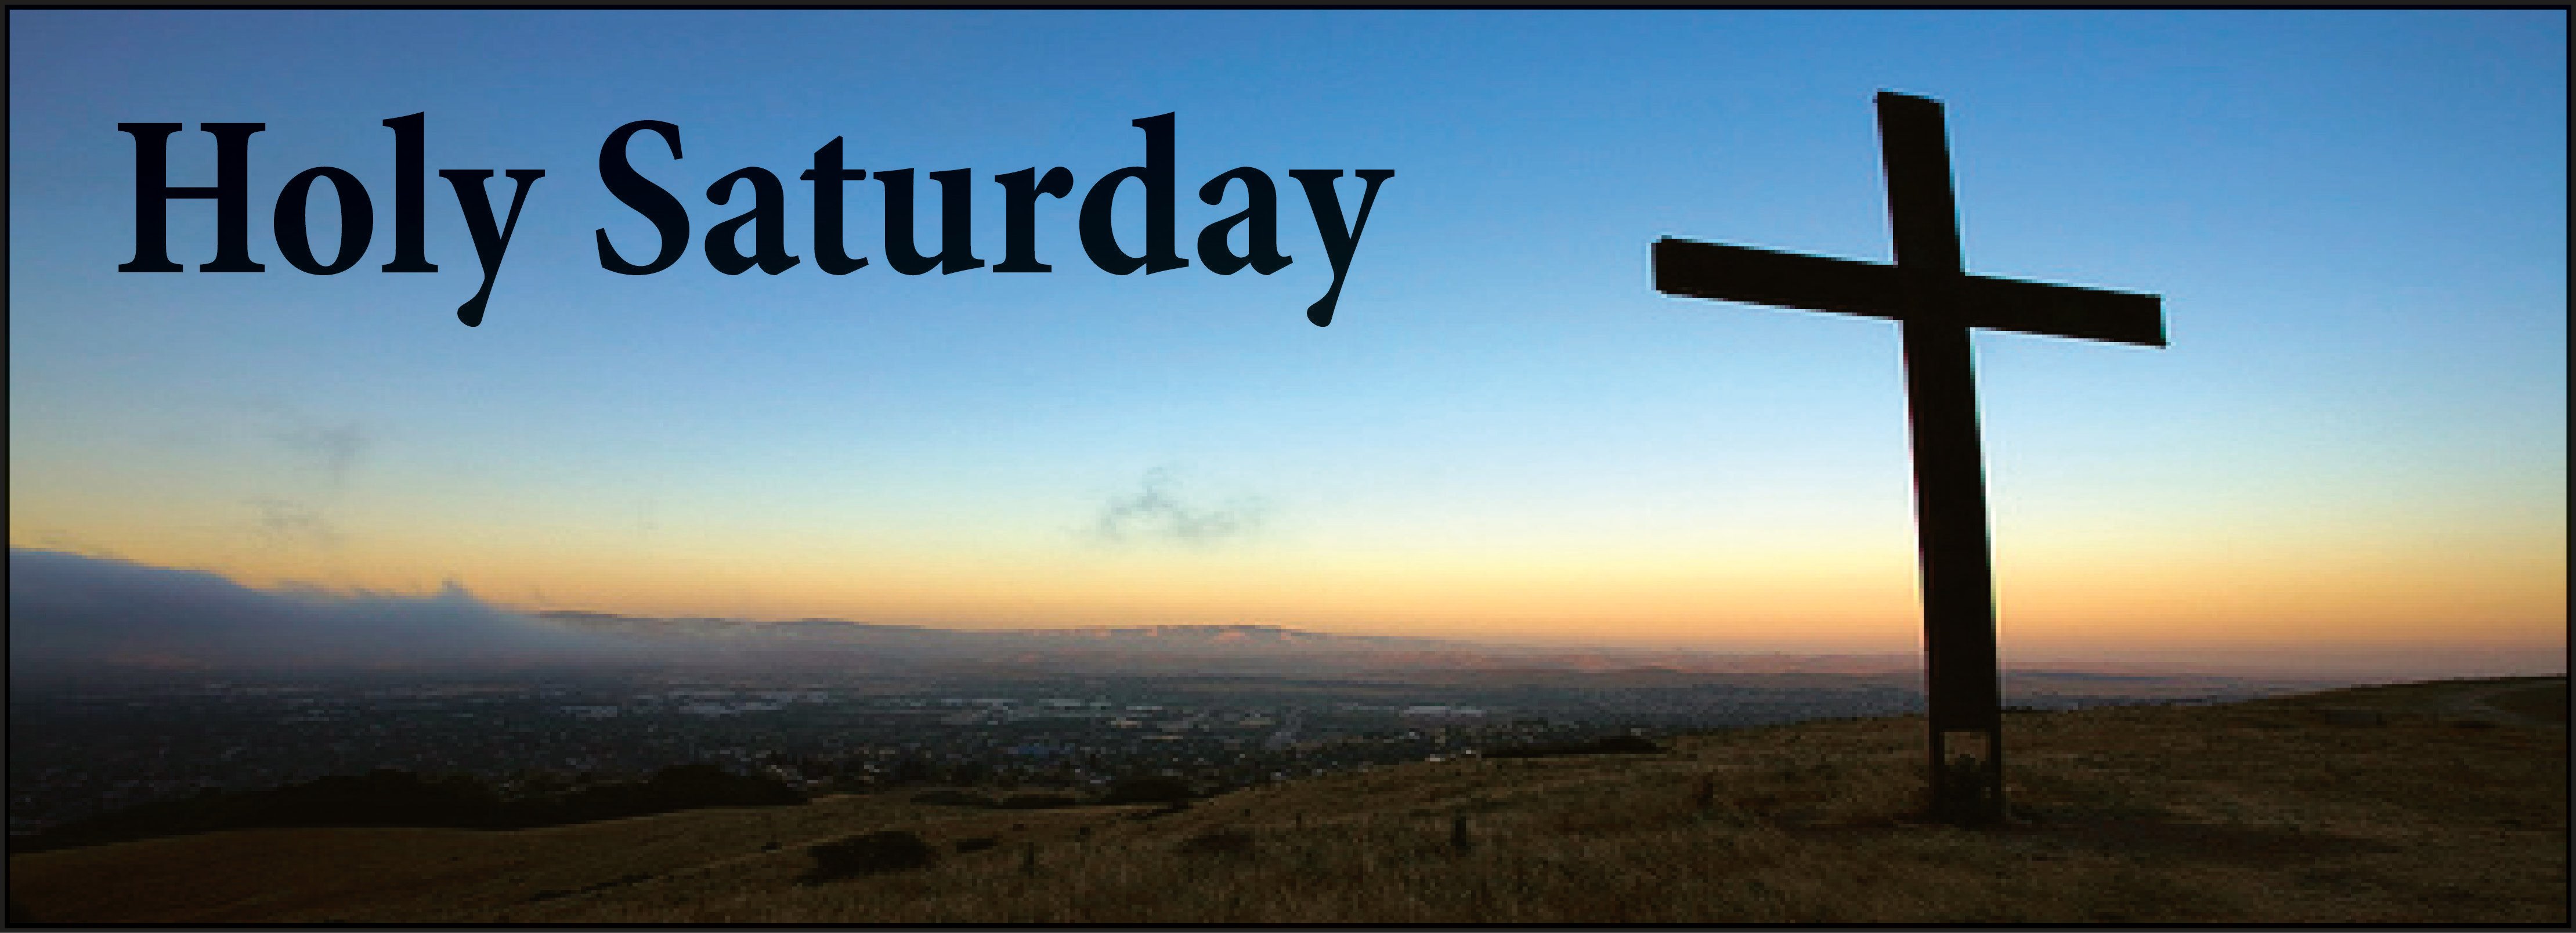 Beautiful Holy Saturday Wish Picture